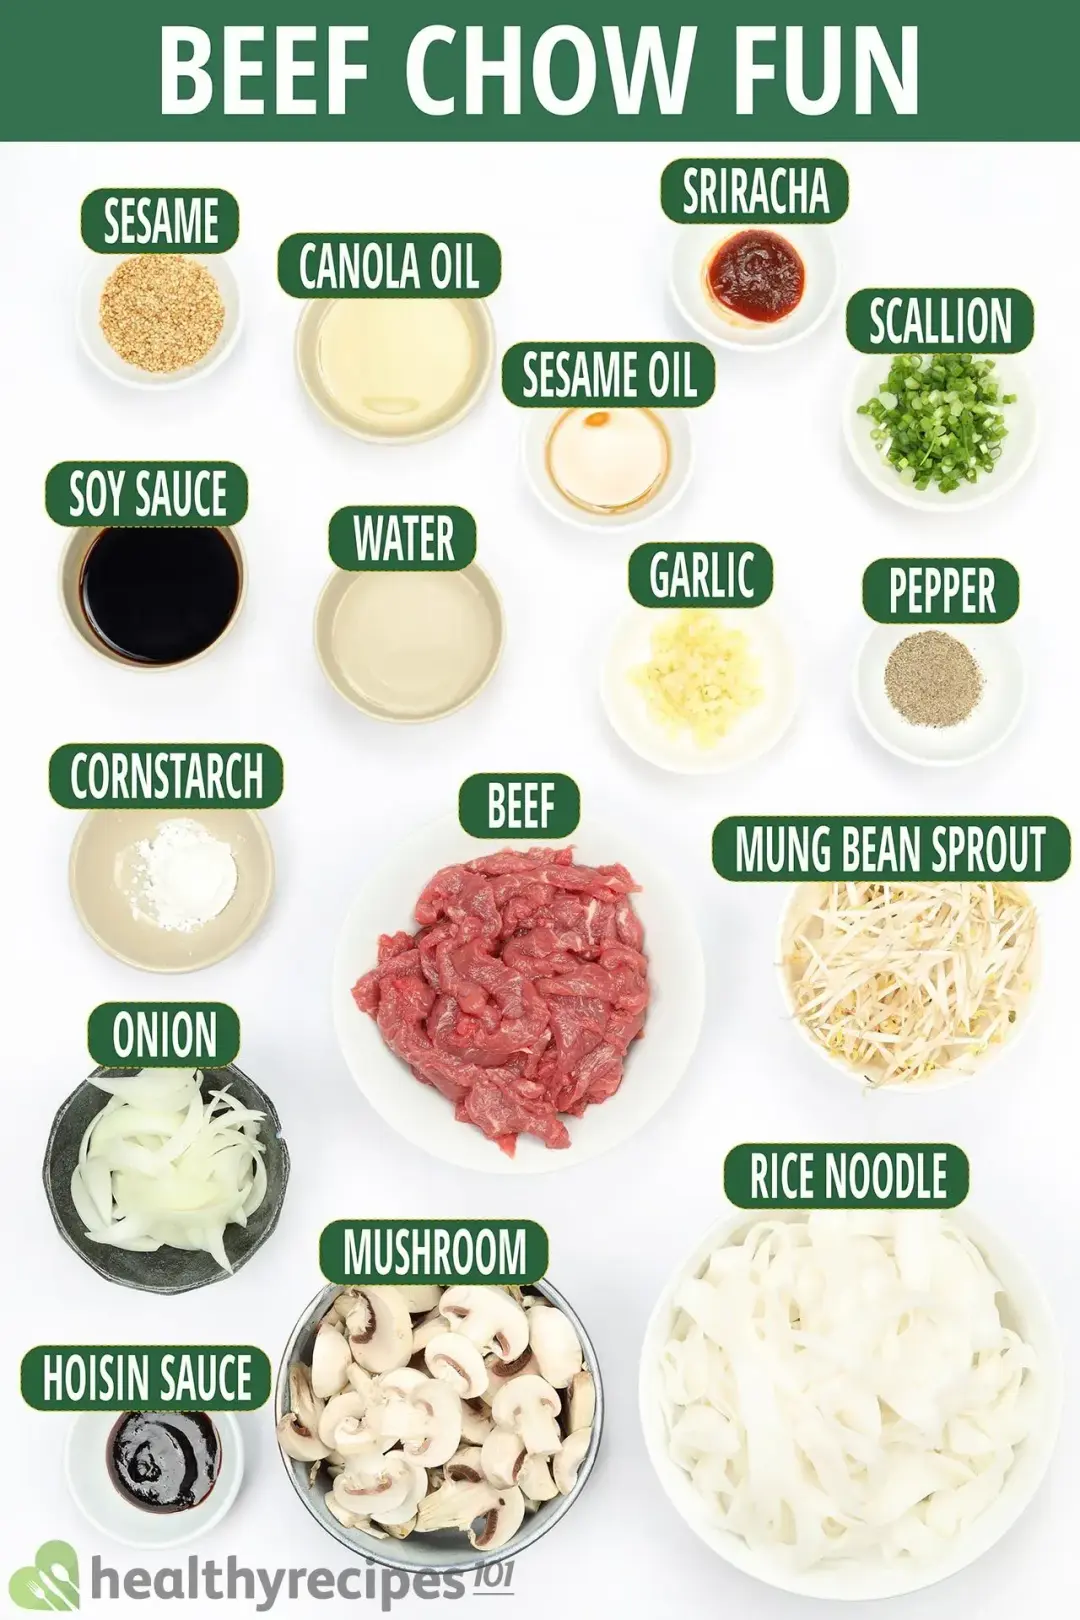 Ingredients for Beef Chow Fun